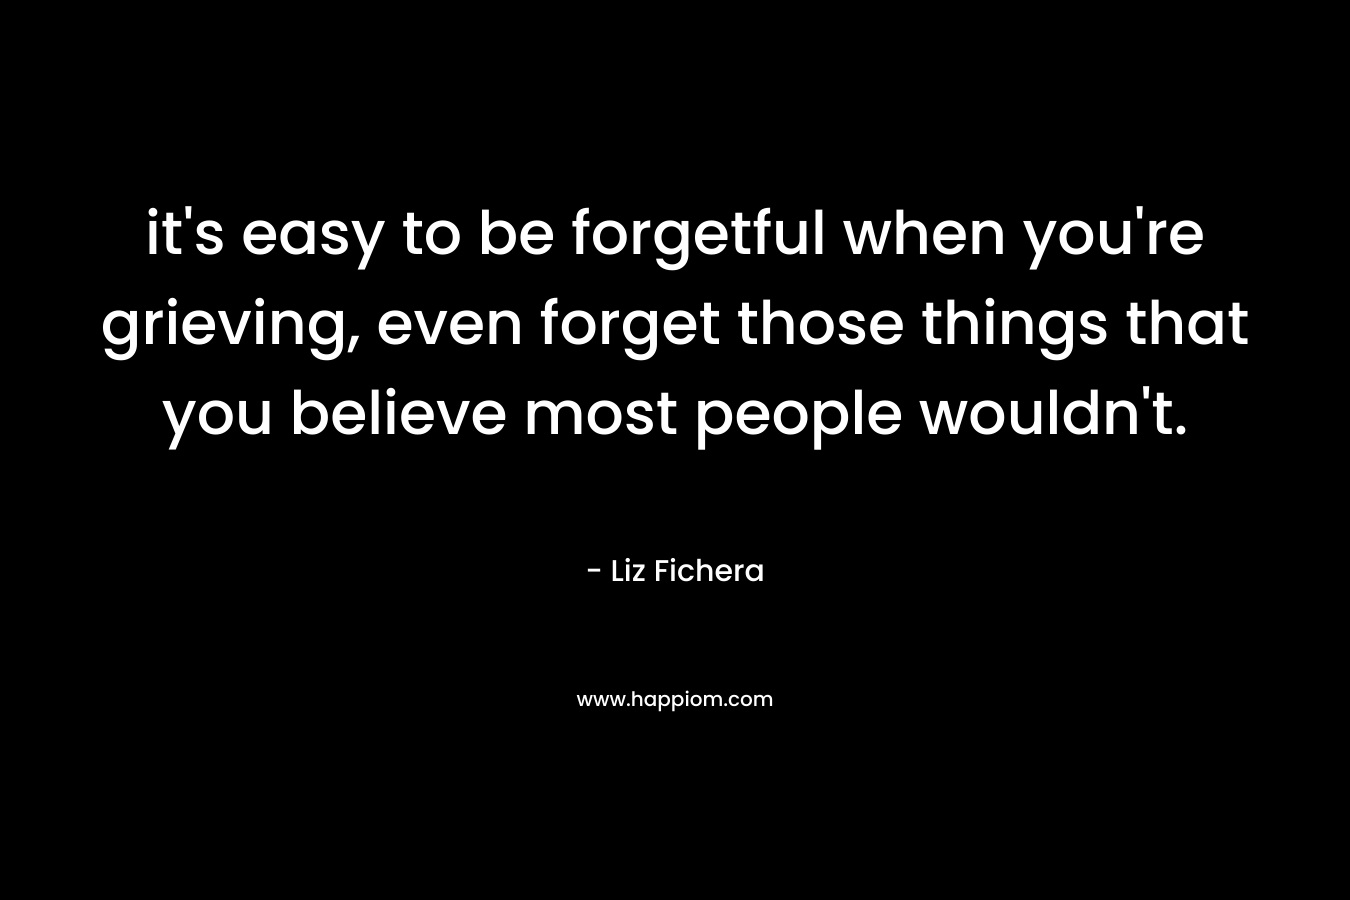 it's easy to be forgetful when you're grieving, even forget those things that you believe most people wouldn't.